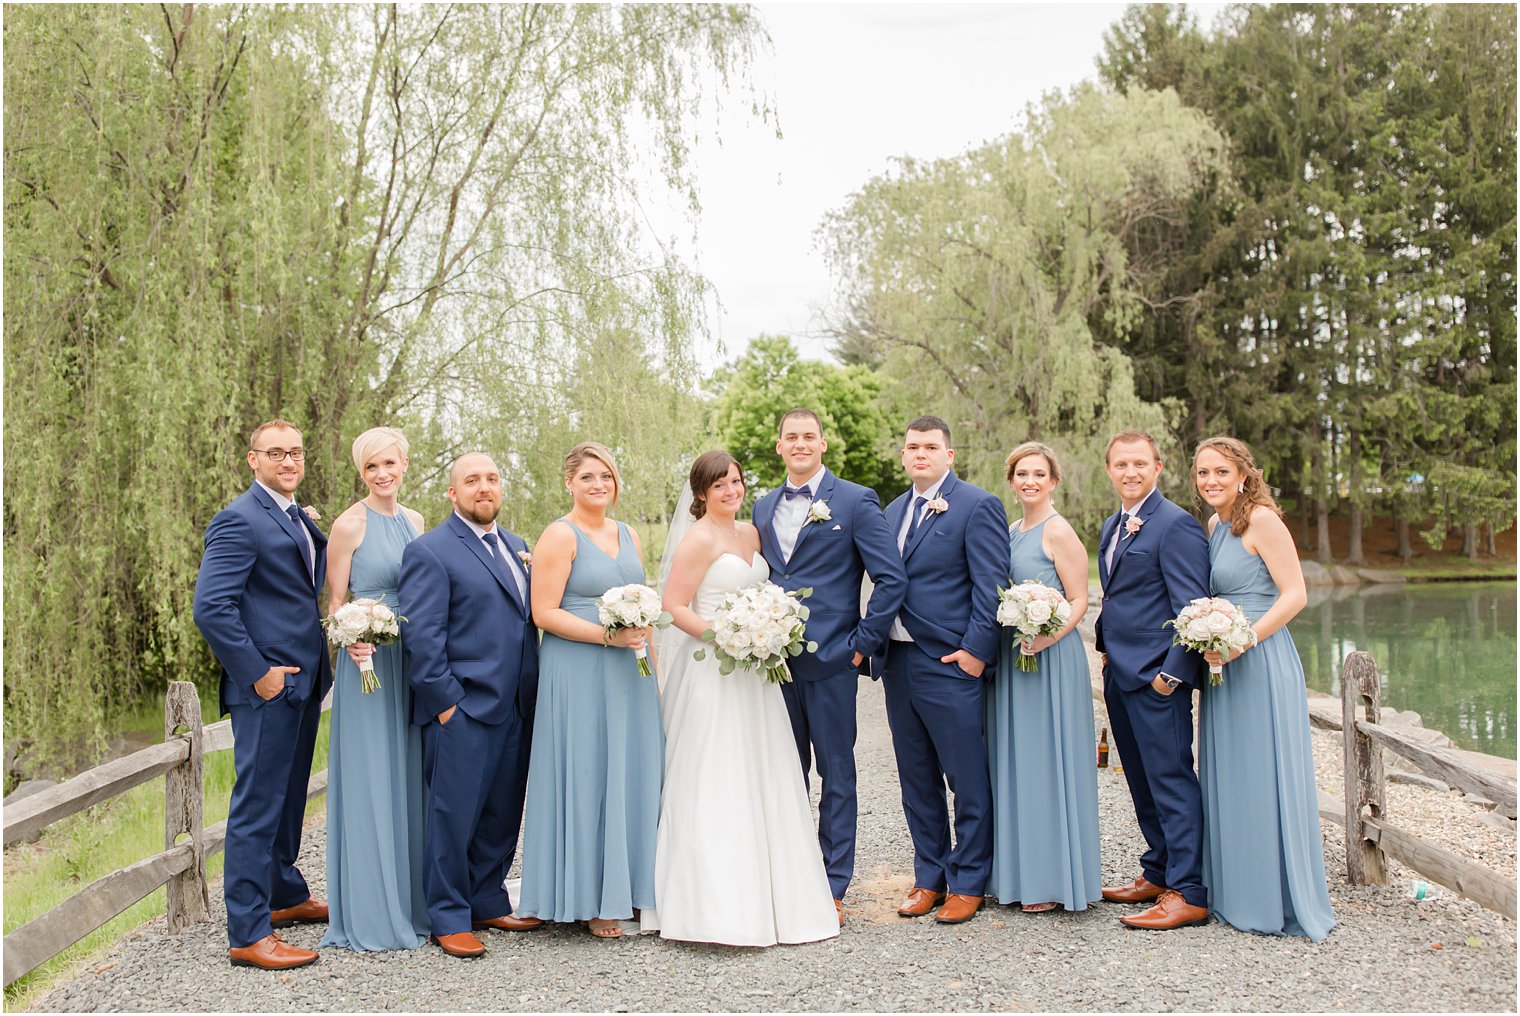 Formal bridal party portraits at Windows on the Water at Frogbridge in Millstone NJ